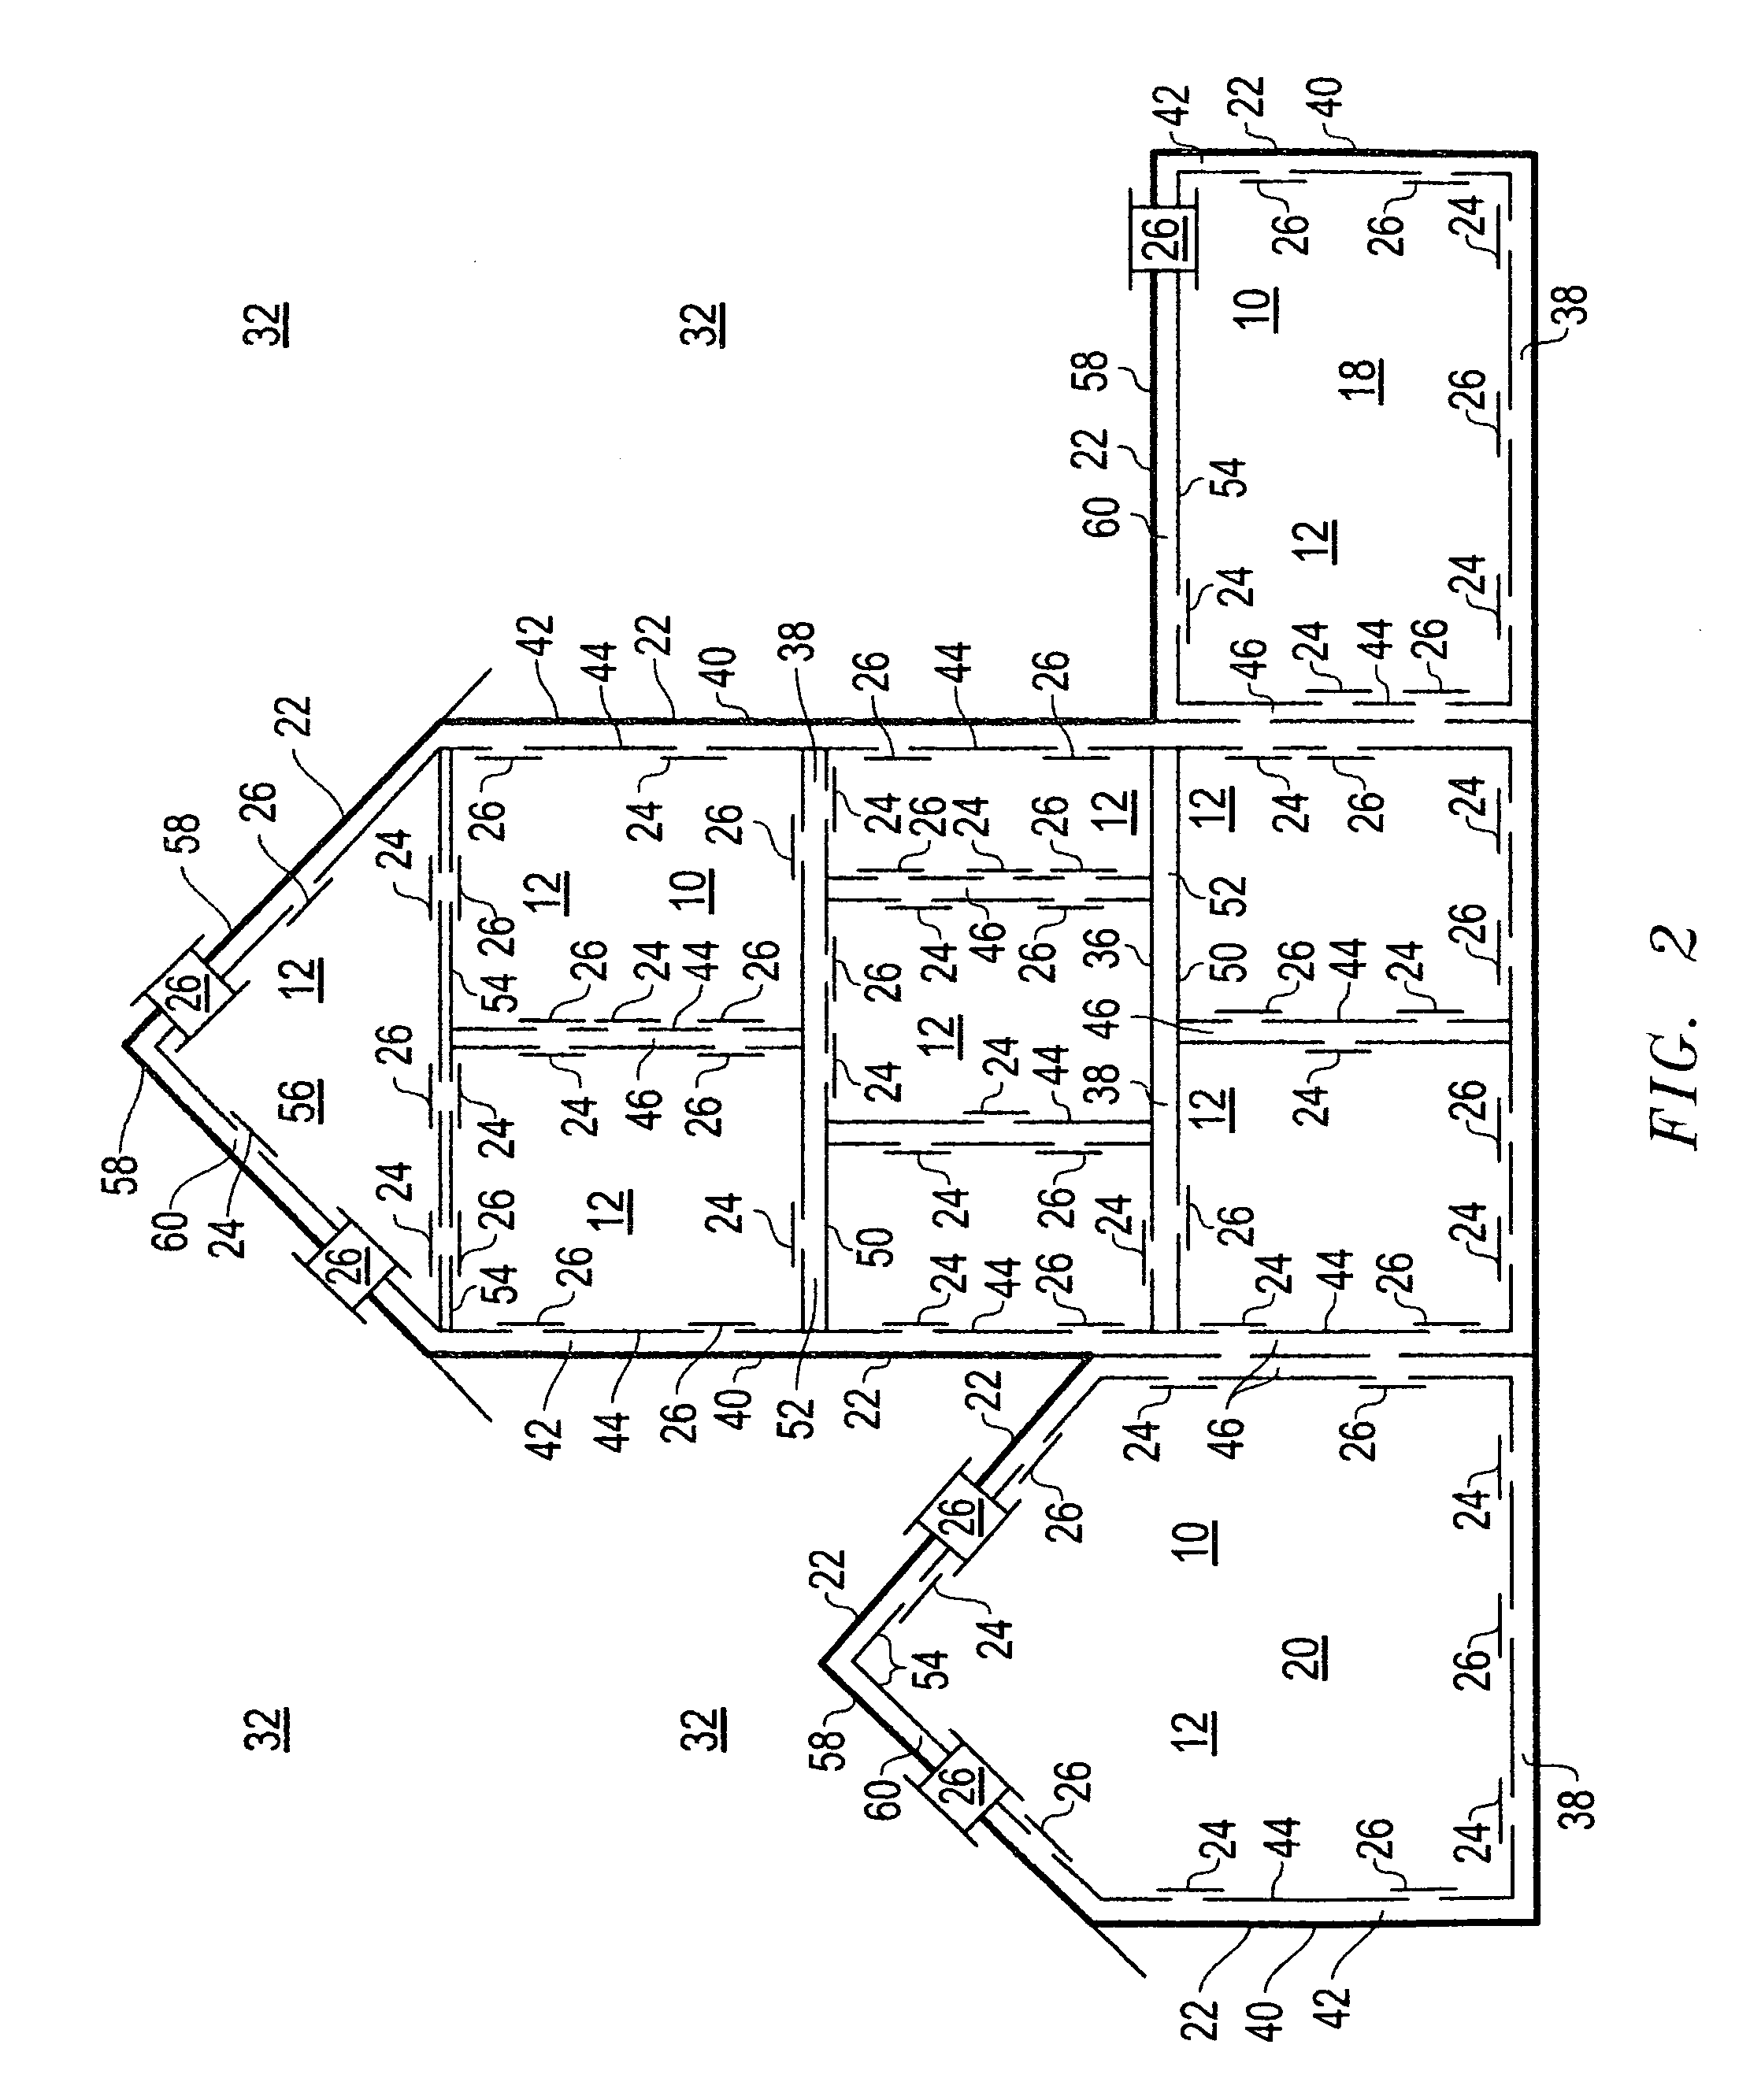 Method and apparatus to utilize wind energy within a structure